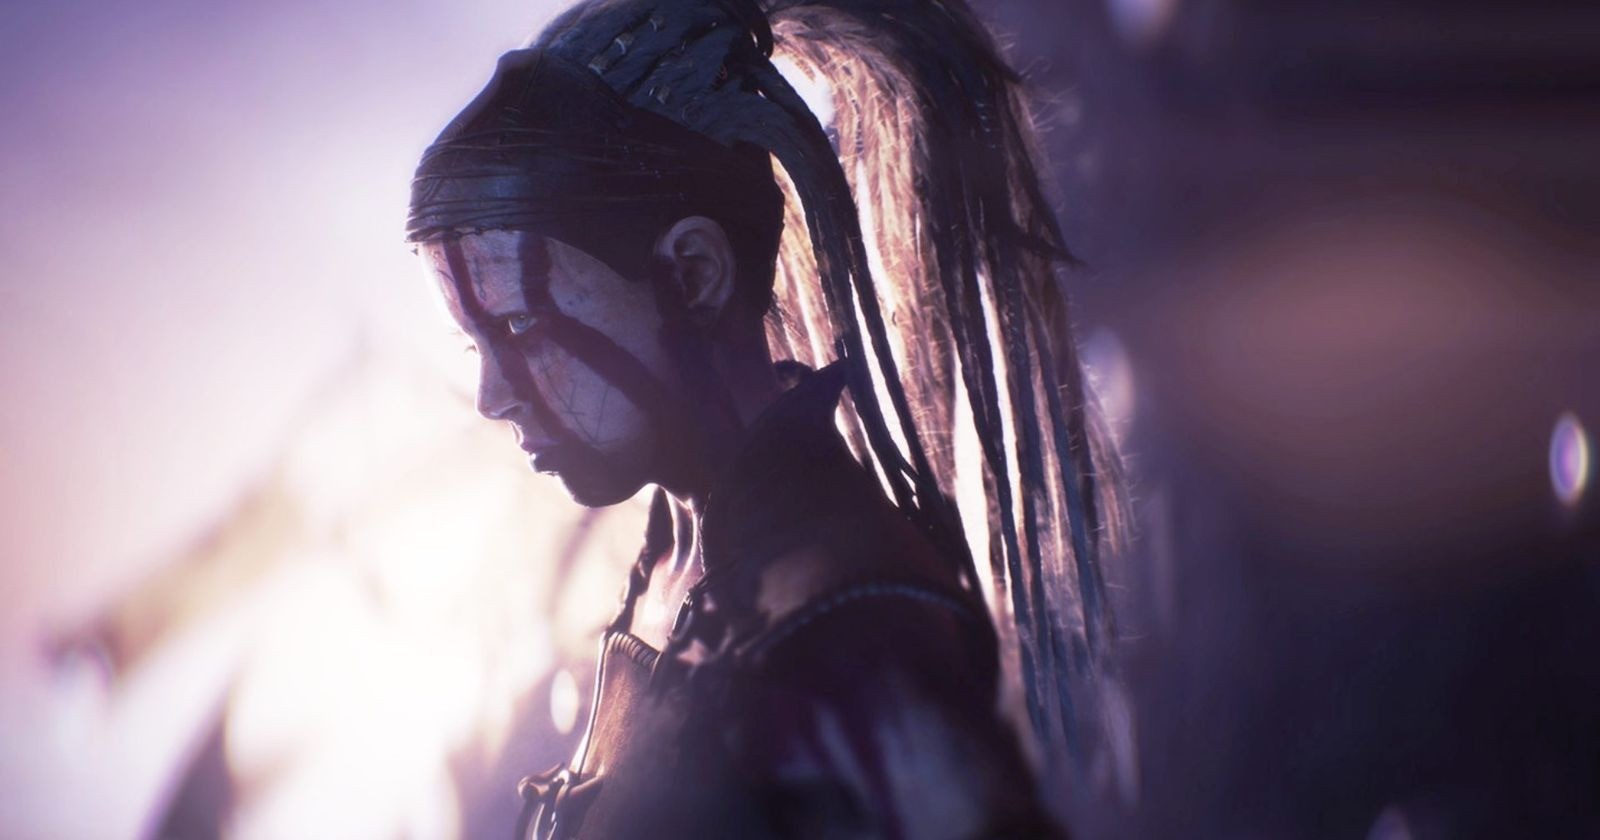 Ninja Theory apparently modeled Melina Juergens' real hair for Hellblade 2.